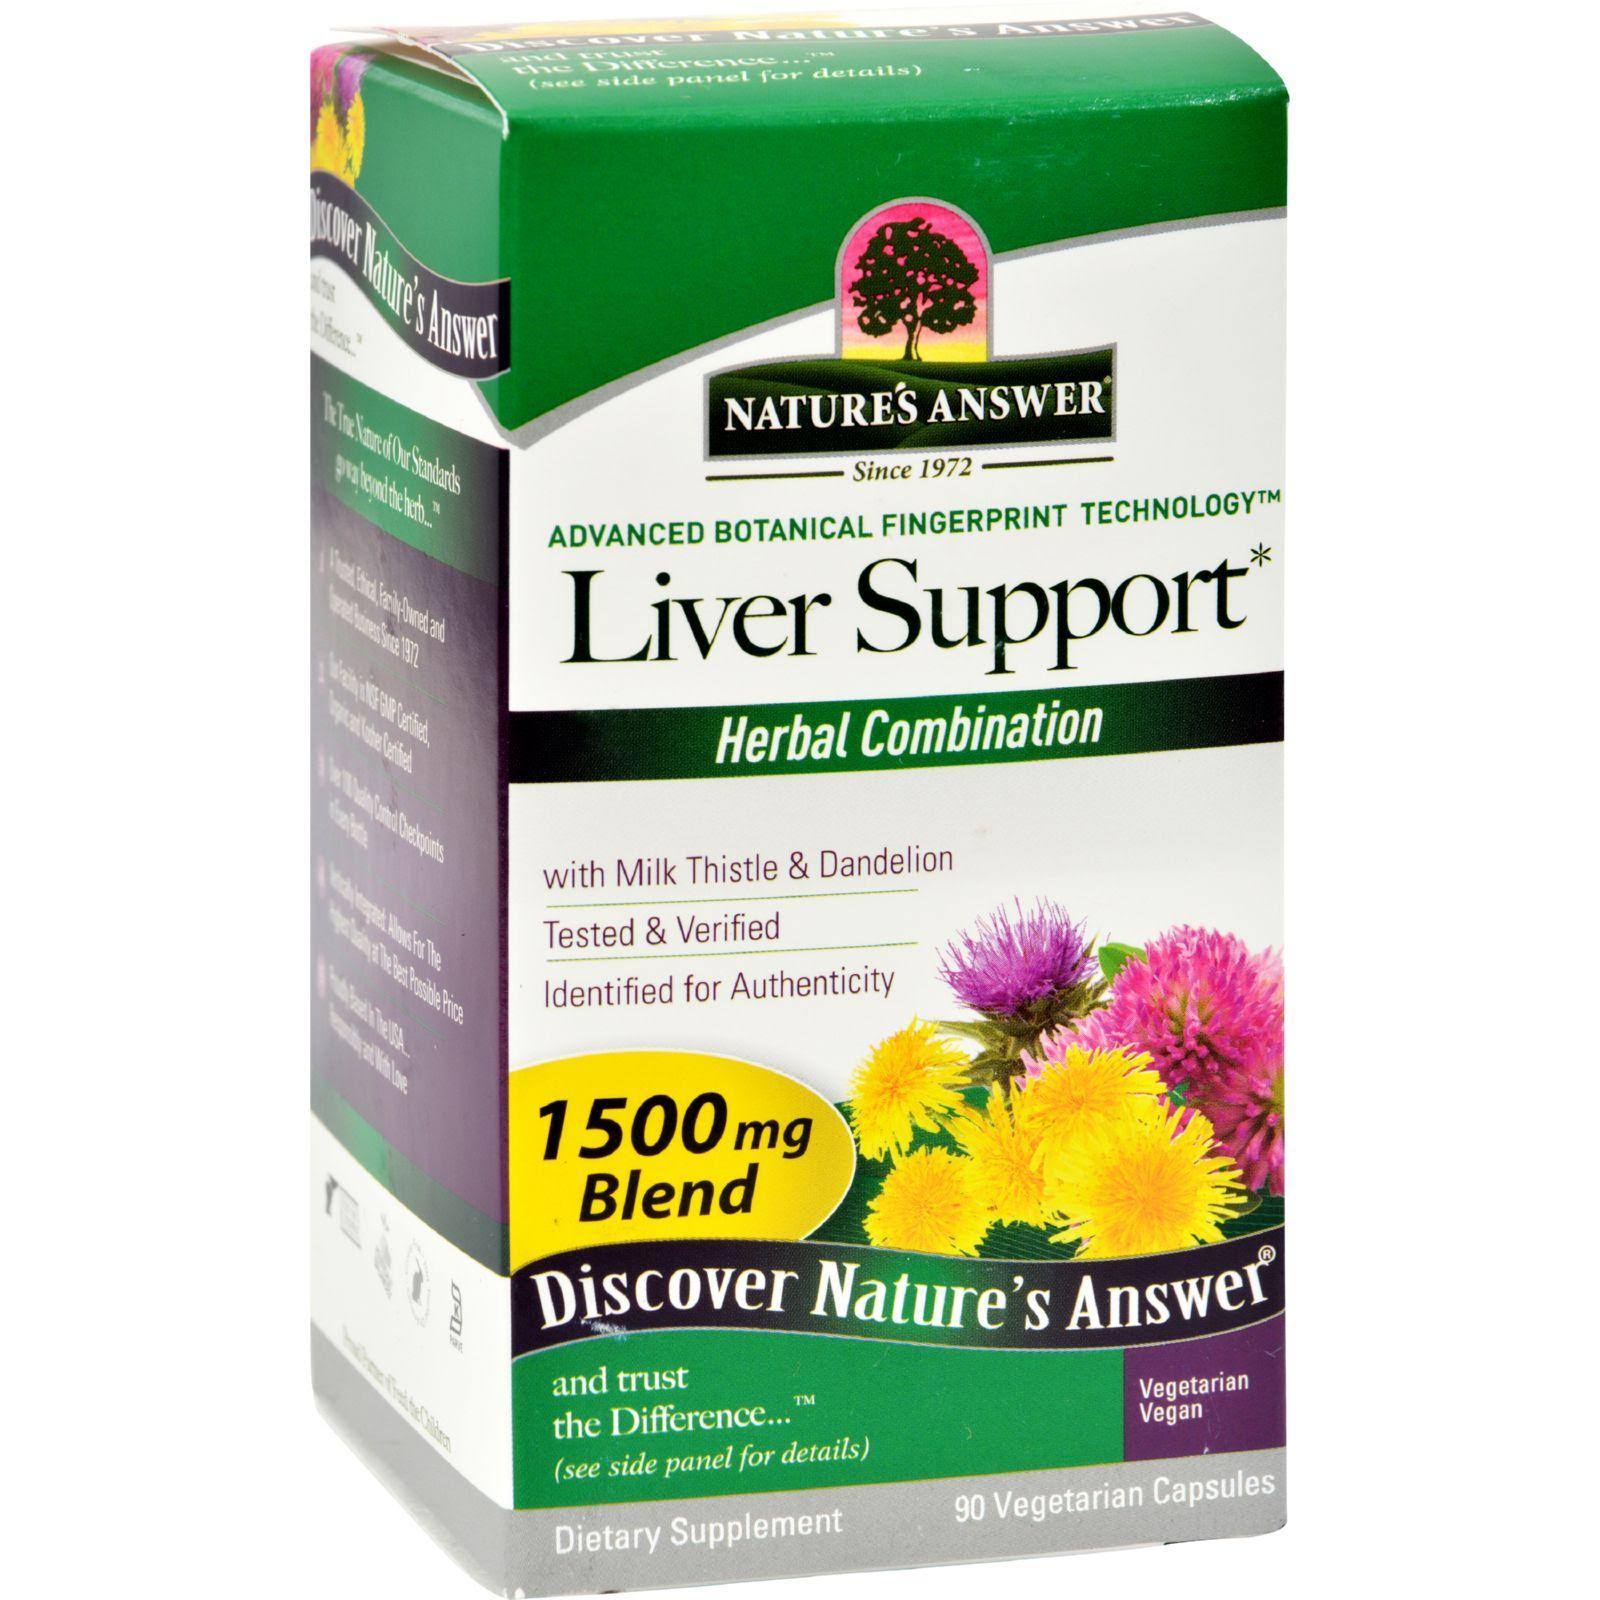 Nature's Answer Liver Support Supplement - 1500mg, 90 Vegetarian Capsules